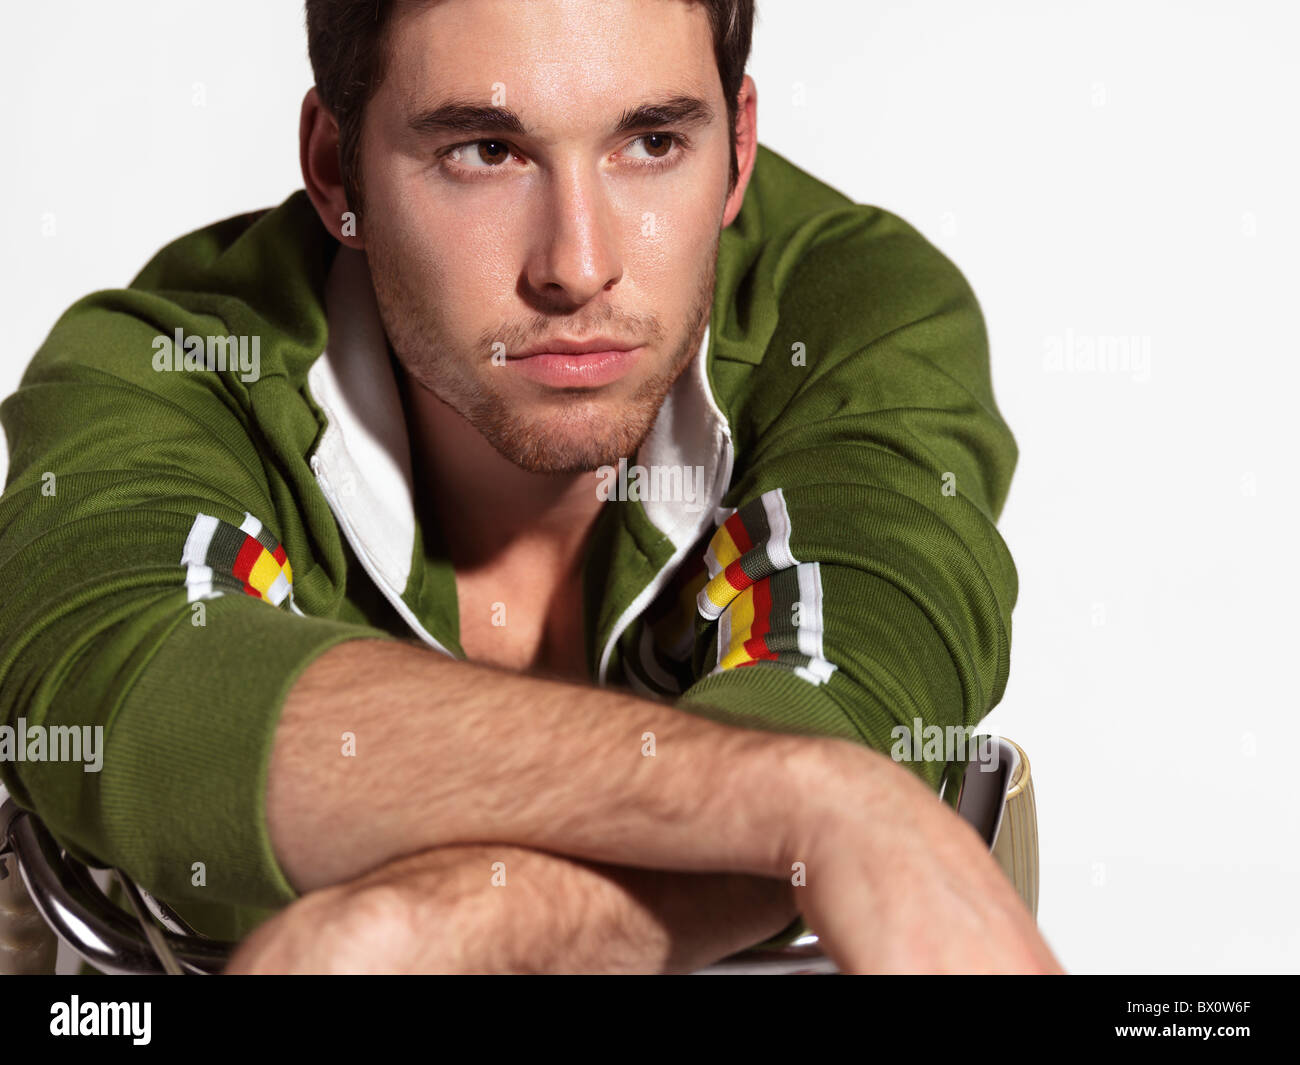 Portrait of a young man on exercise bicycle Stock Photo